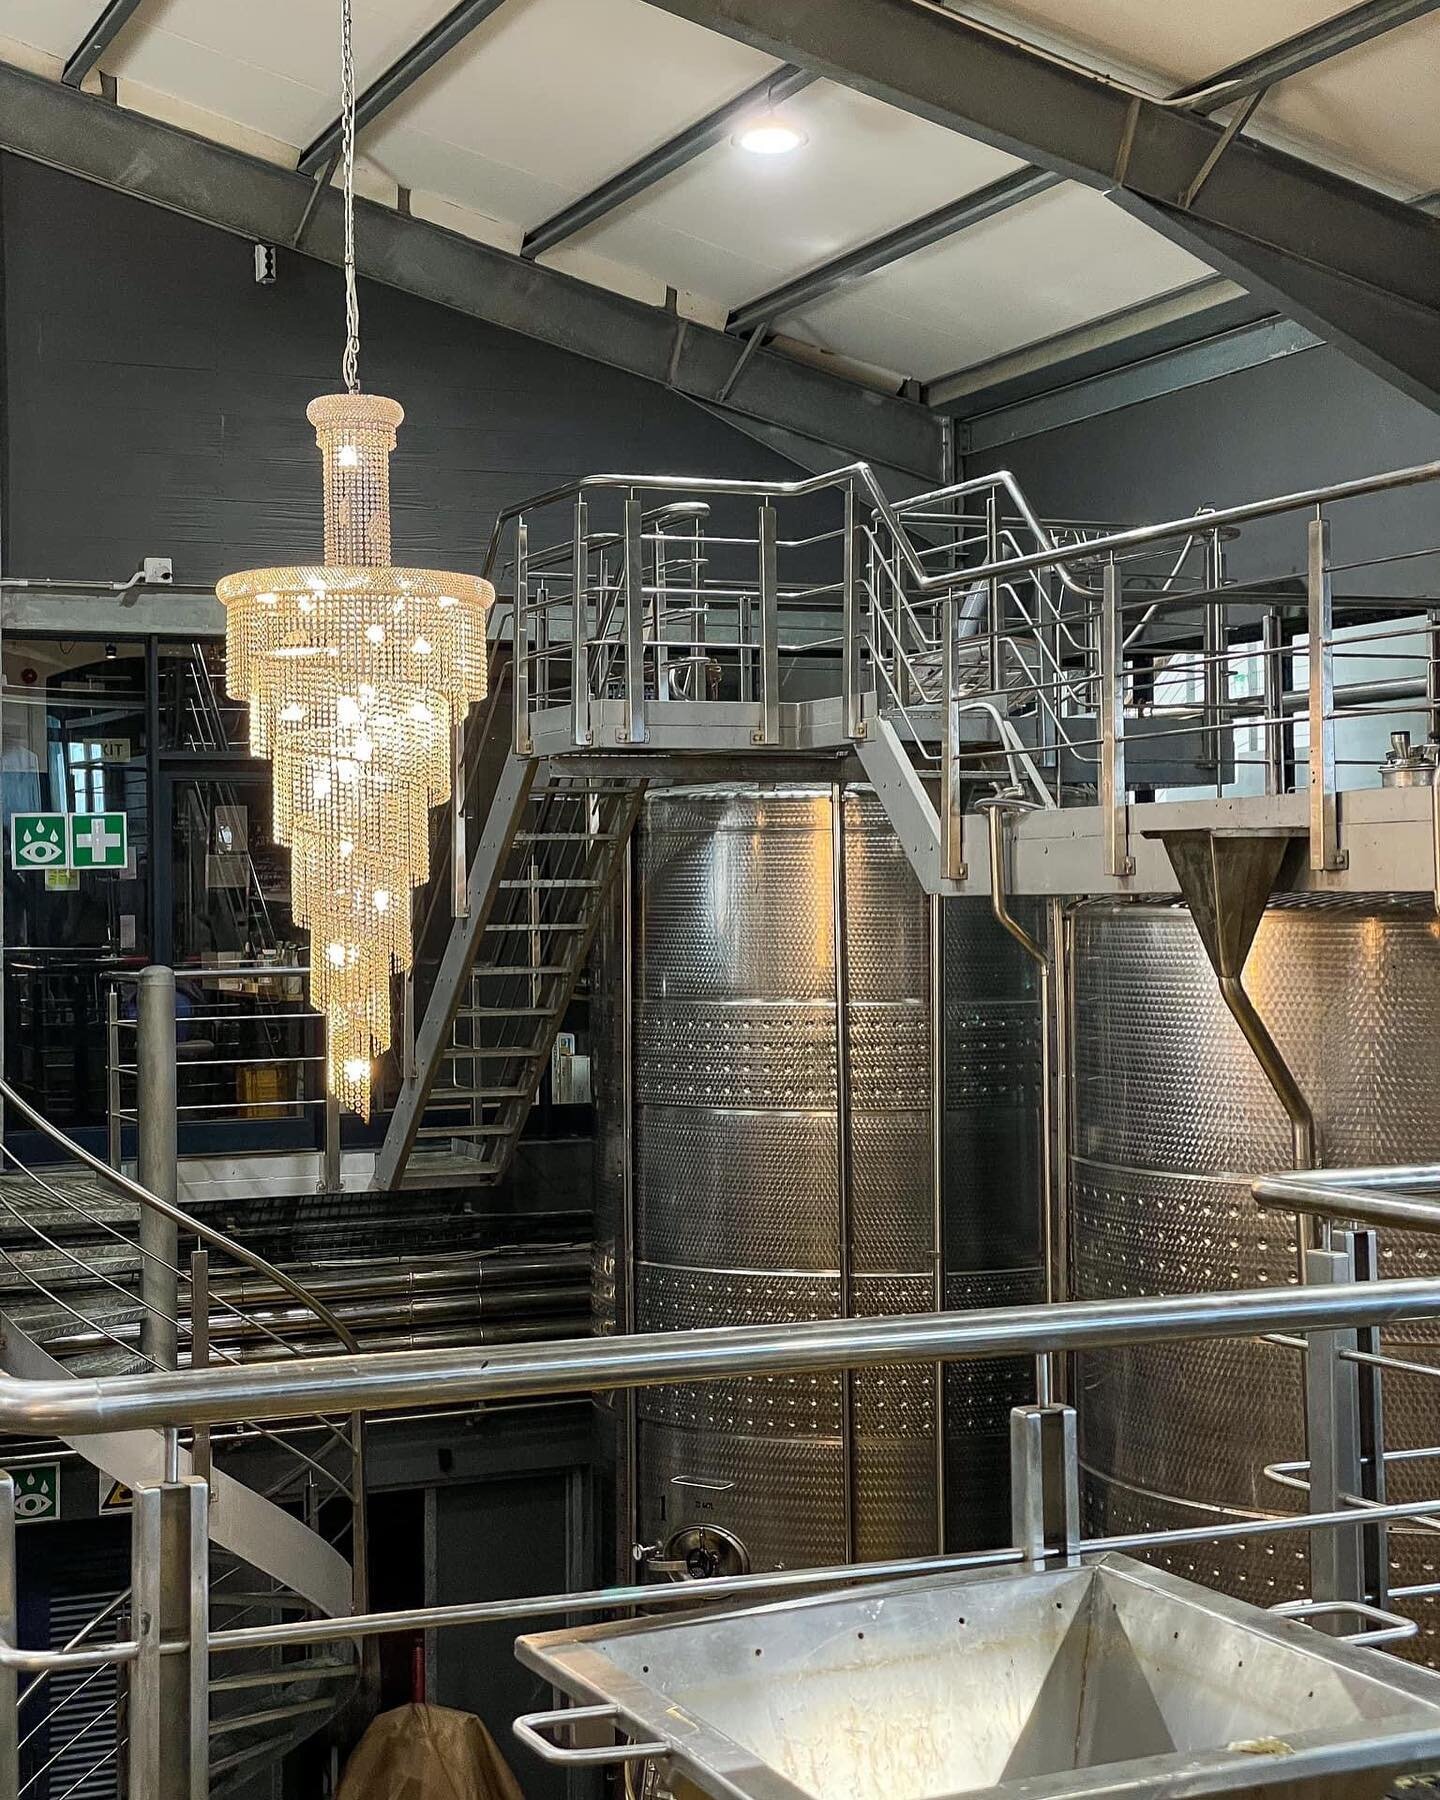 The Art Of Wine Making. Experience an informative and interesting tour of our state of the art wine cellar. Guests can see for themselves where we finish what nature has started. Taste some of the best South African wines directly from the barrel and